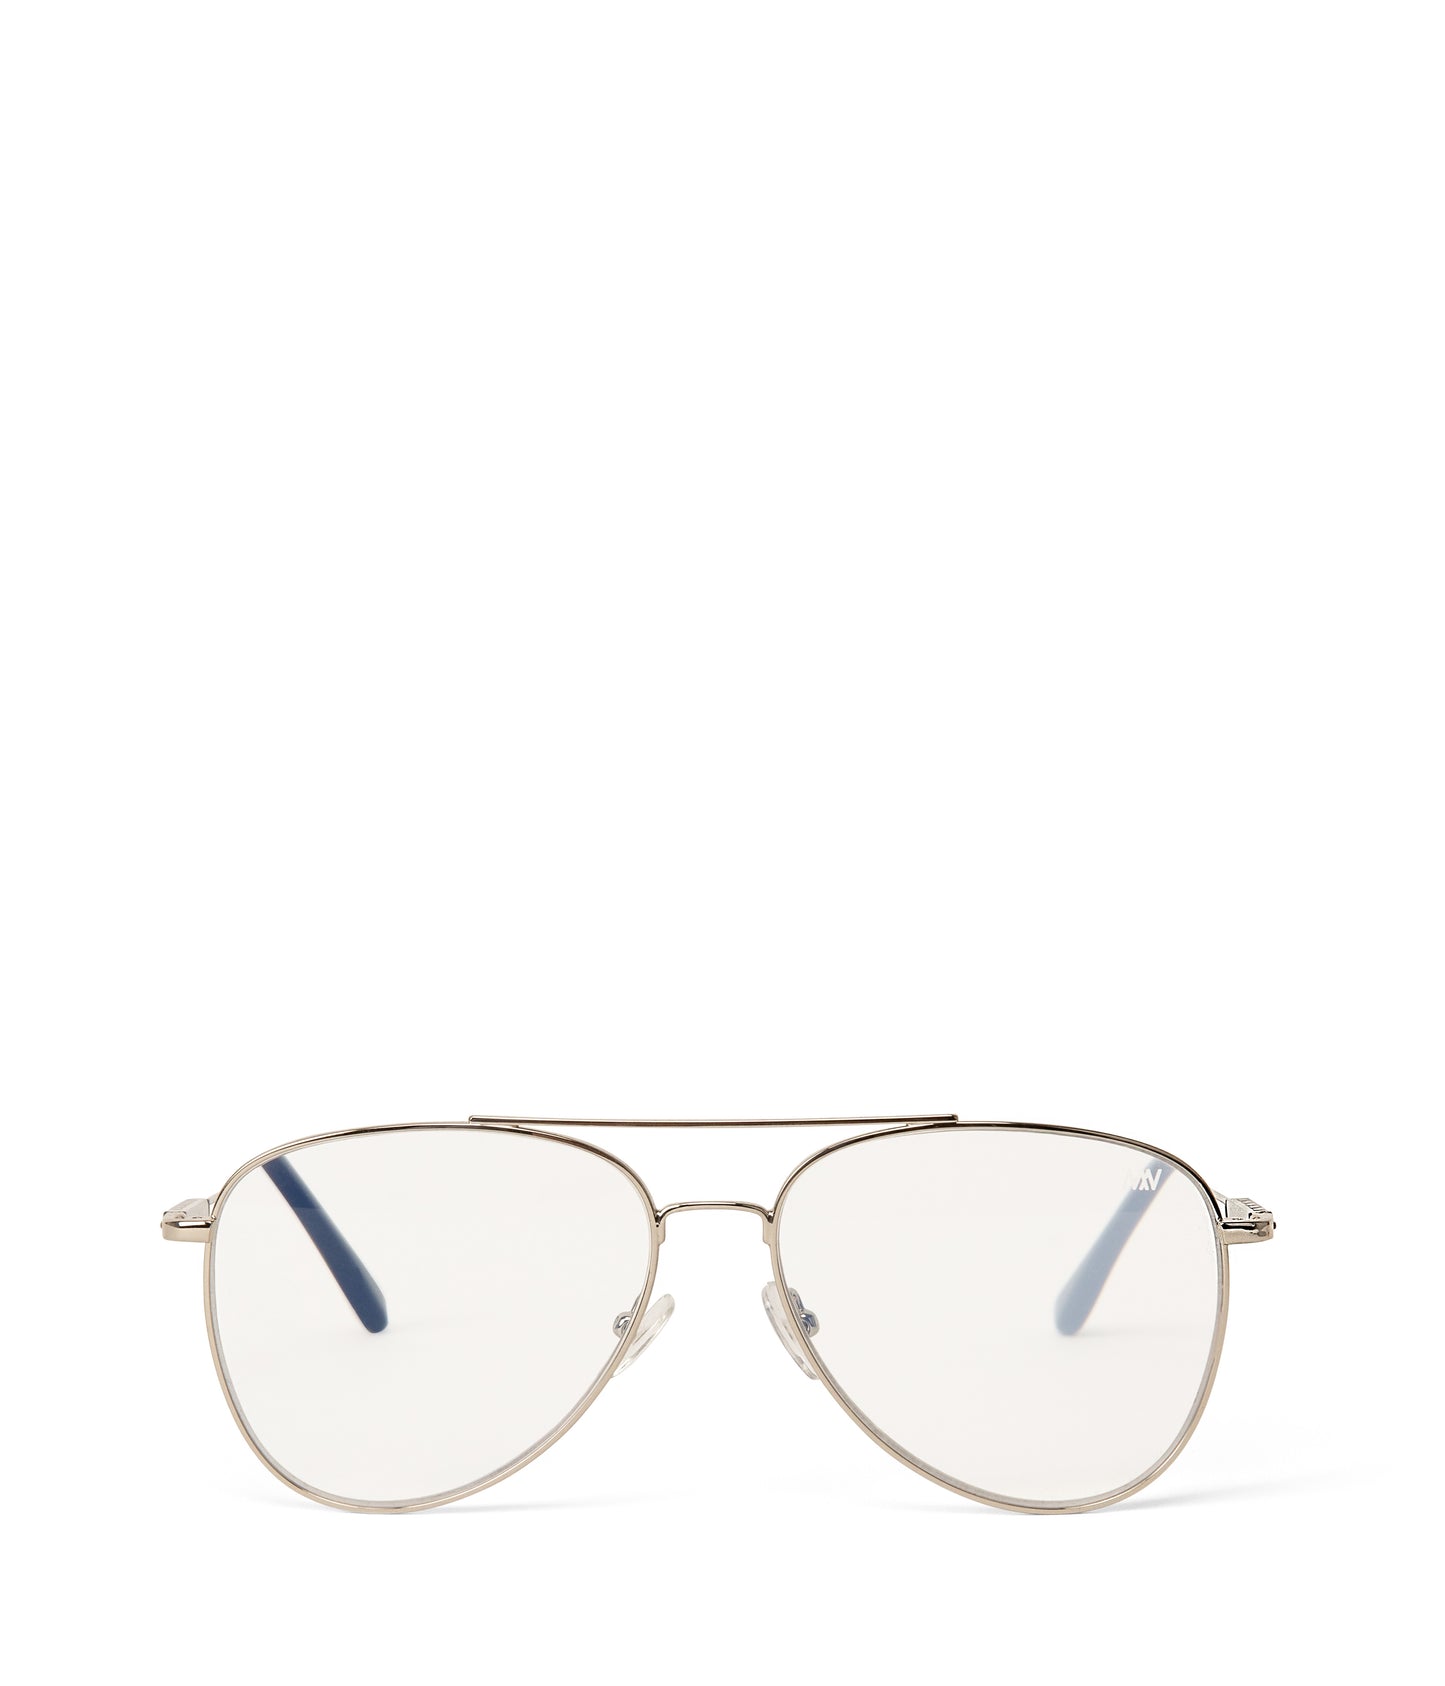 HIMARI-3 Recycled Aviator Reading Glasses | Color: Grey - variant::silver